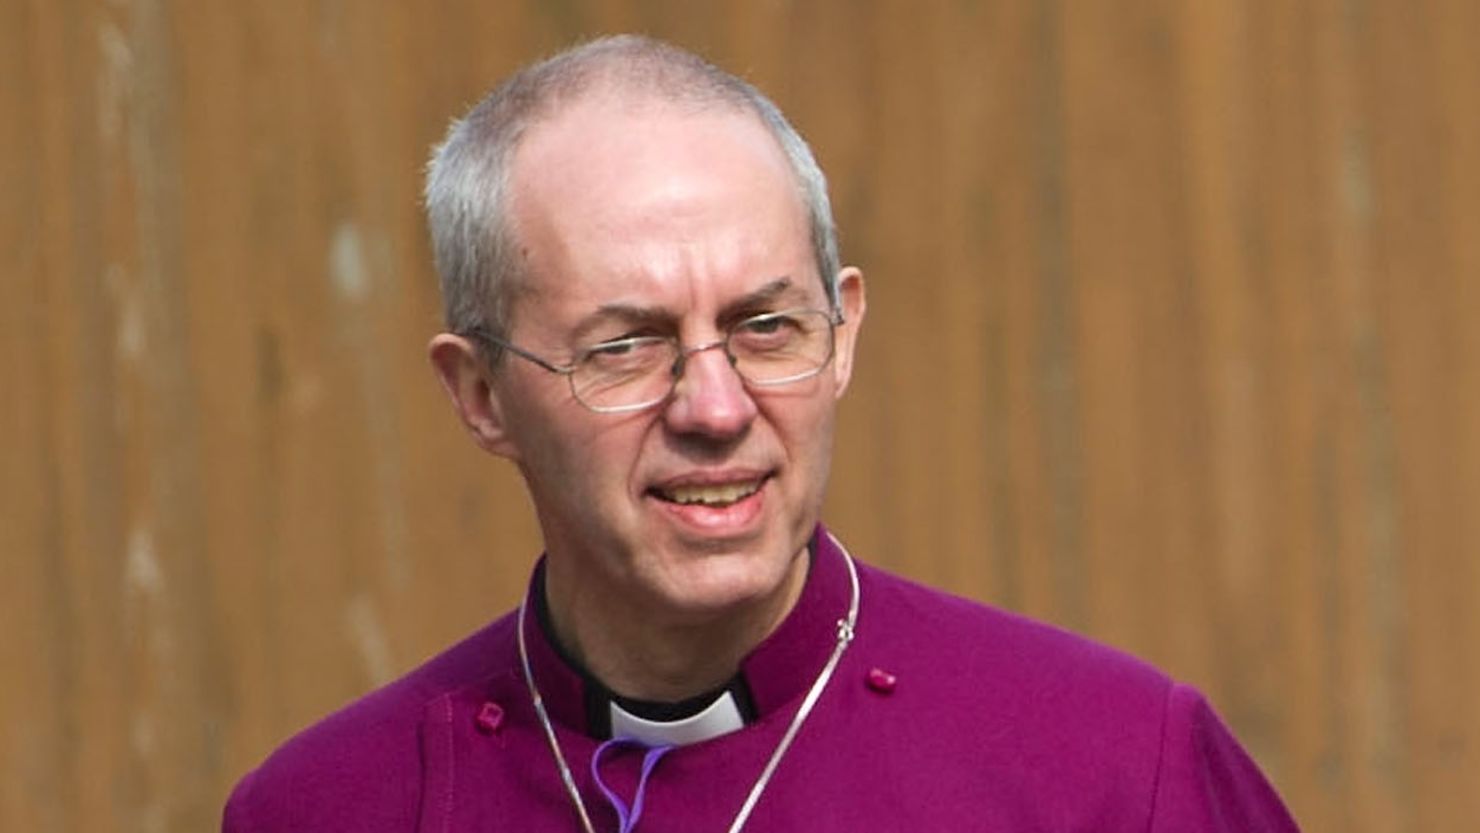 The Most Reverend Justin Welby before his enthronement as Archbishop of Canterbury at Canterbury Cathedral on March 21.